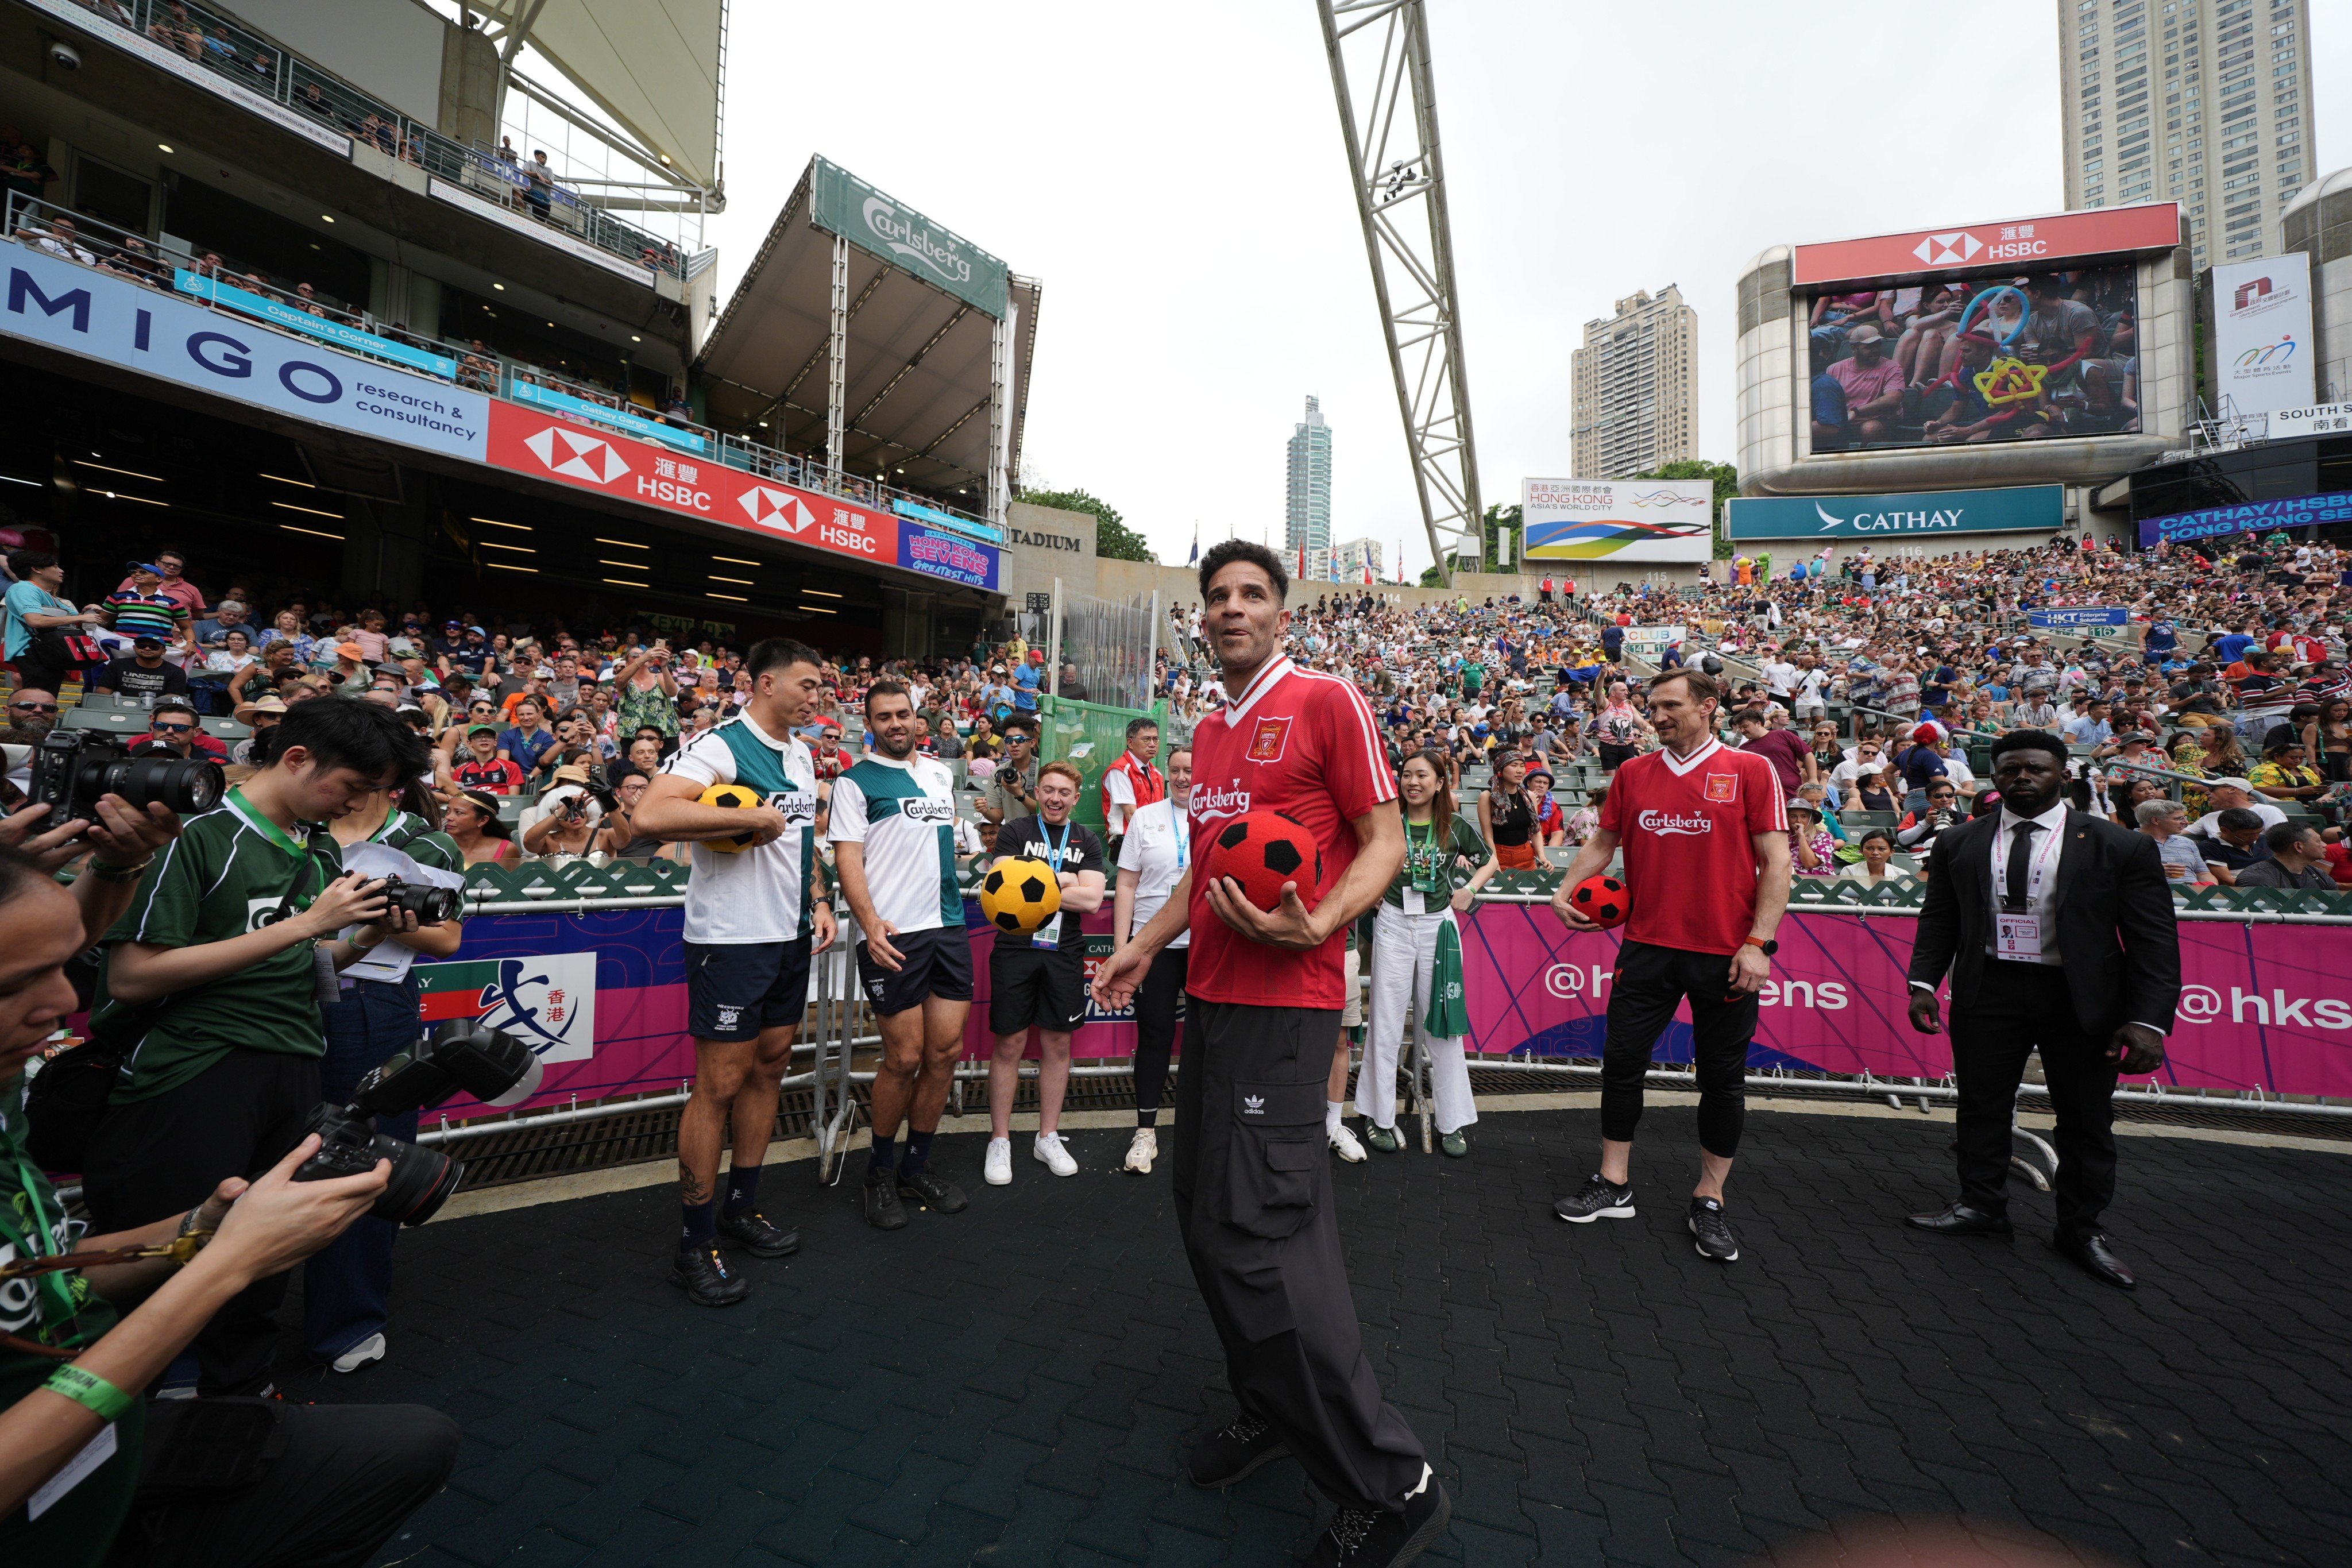 David James relished his first experience of the Cathay/HSBC Hong Kong Sevens. Photo: Eugene Lee